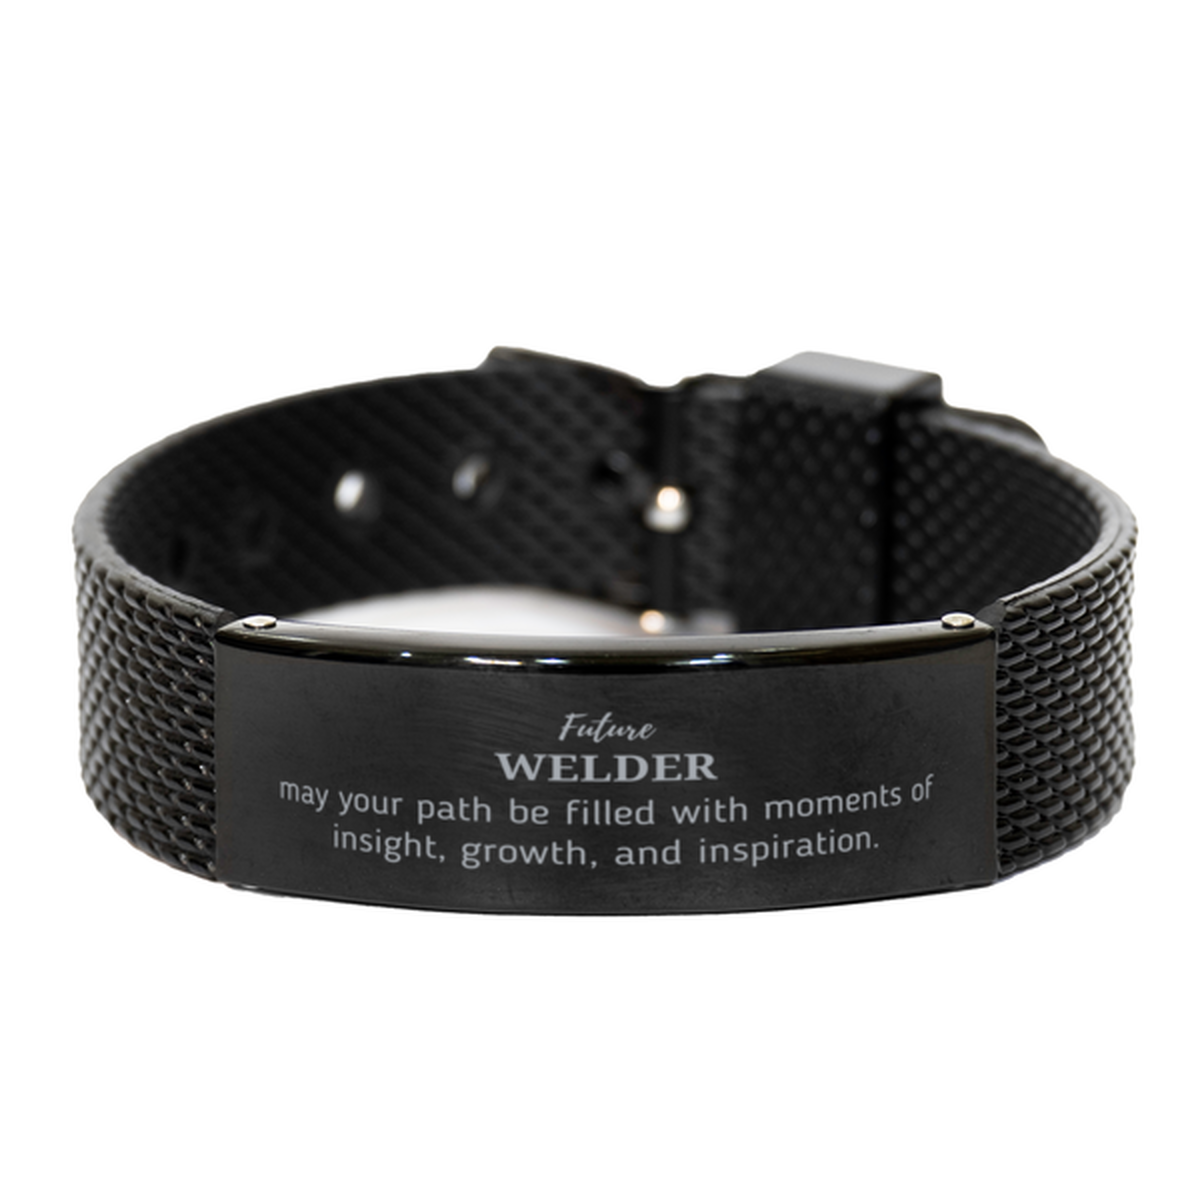 Future Welder Gifts, May your path be filled with moments of insight, Graduation Gifts for New Welder, Christmas Unique Black Shark Mesh Bracelet For Men, Women, Friends